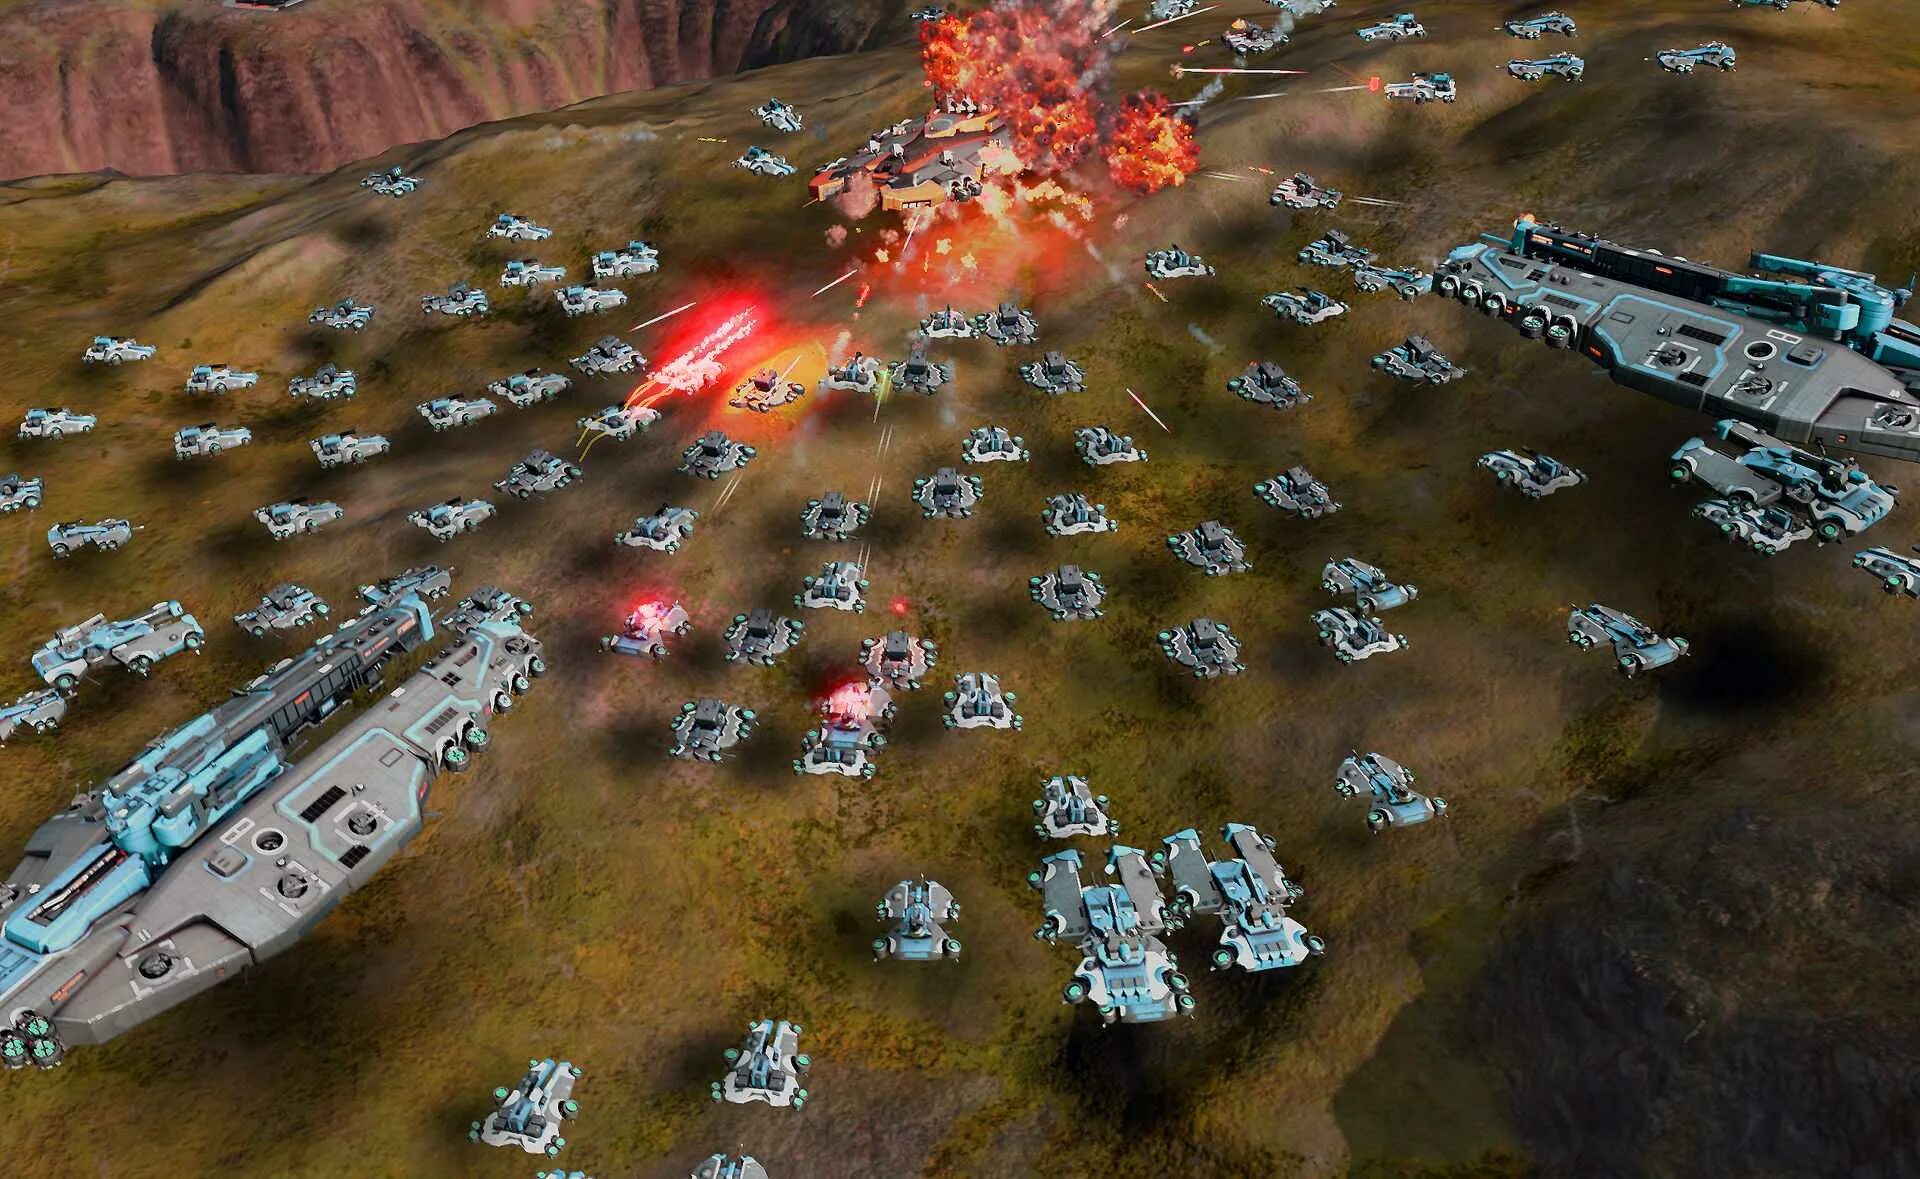 Ashes of the Singularity. Игру Ashes of the Singularity. RTS 2000 годов. RTS игр (real-time Strategy). Игры похожие на стратегии